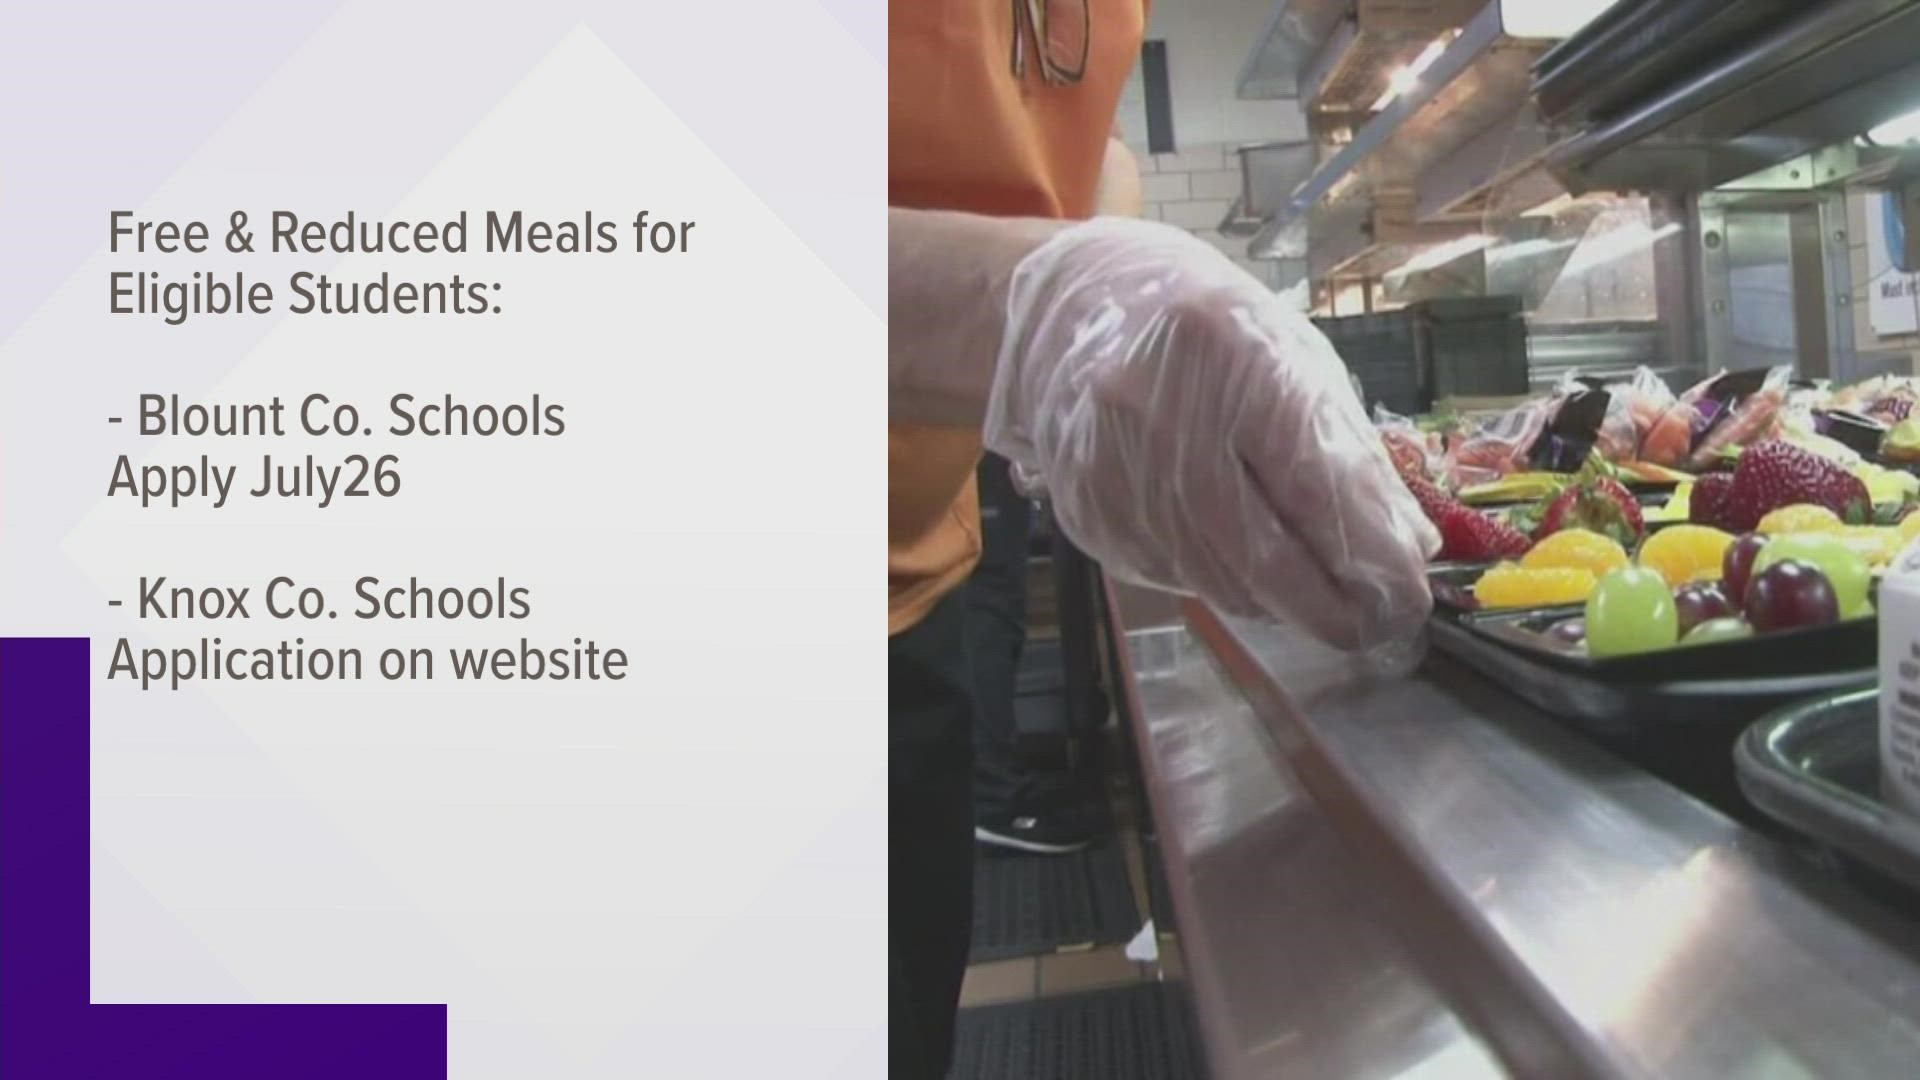 Some East Tennessee school districts are changing their meal policies after President Biden signed the "Keep Kids Fed Act" allowing free meals for students.